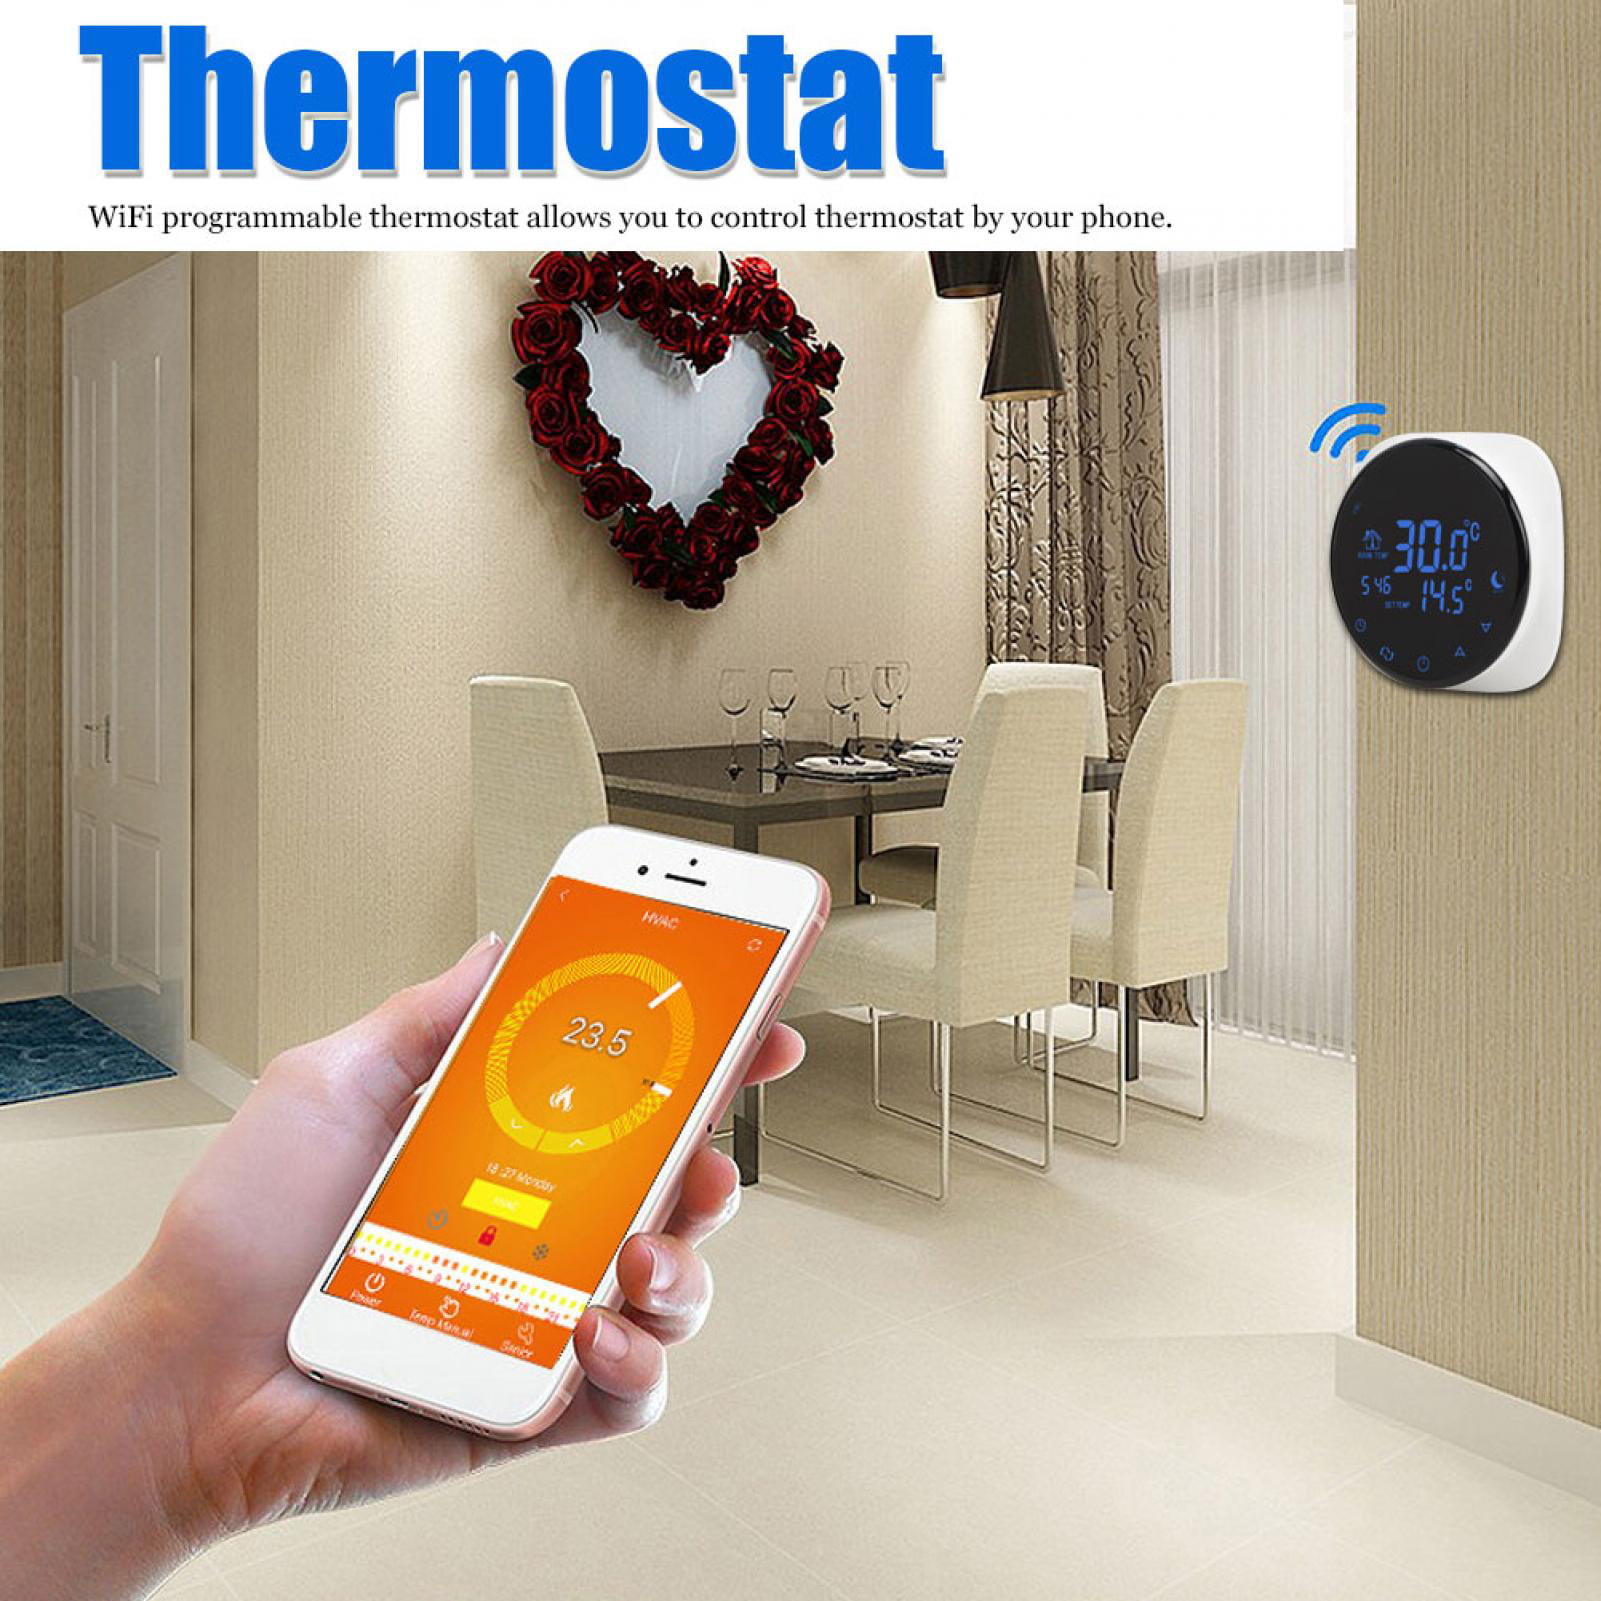 Programmable Thermostat Stable Performance NTC Probe Sensor WiFi Household Supplies for Water Floor Heating for Phone 